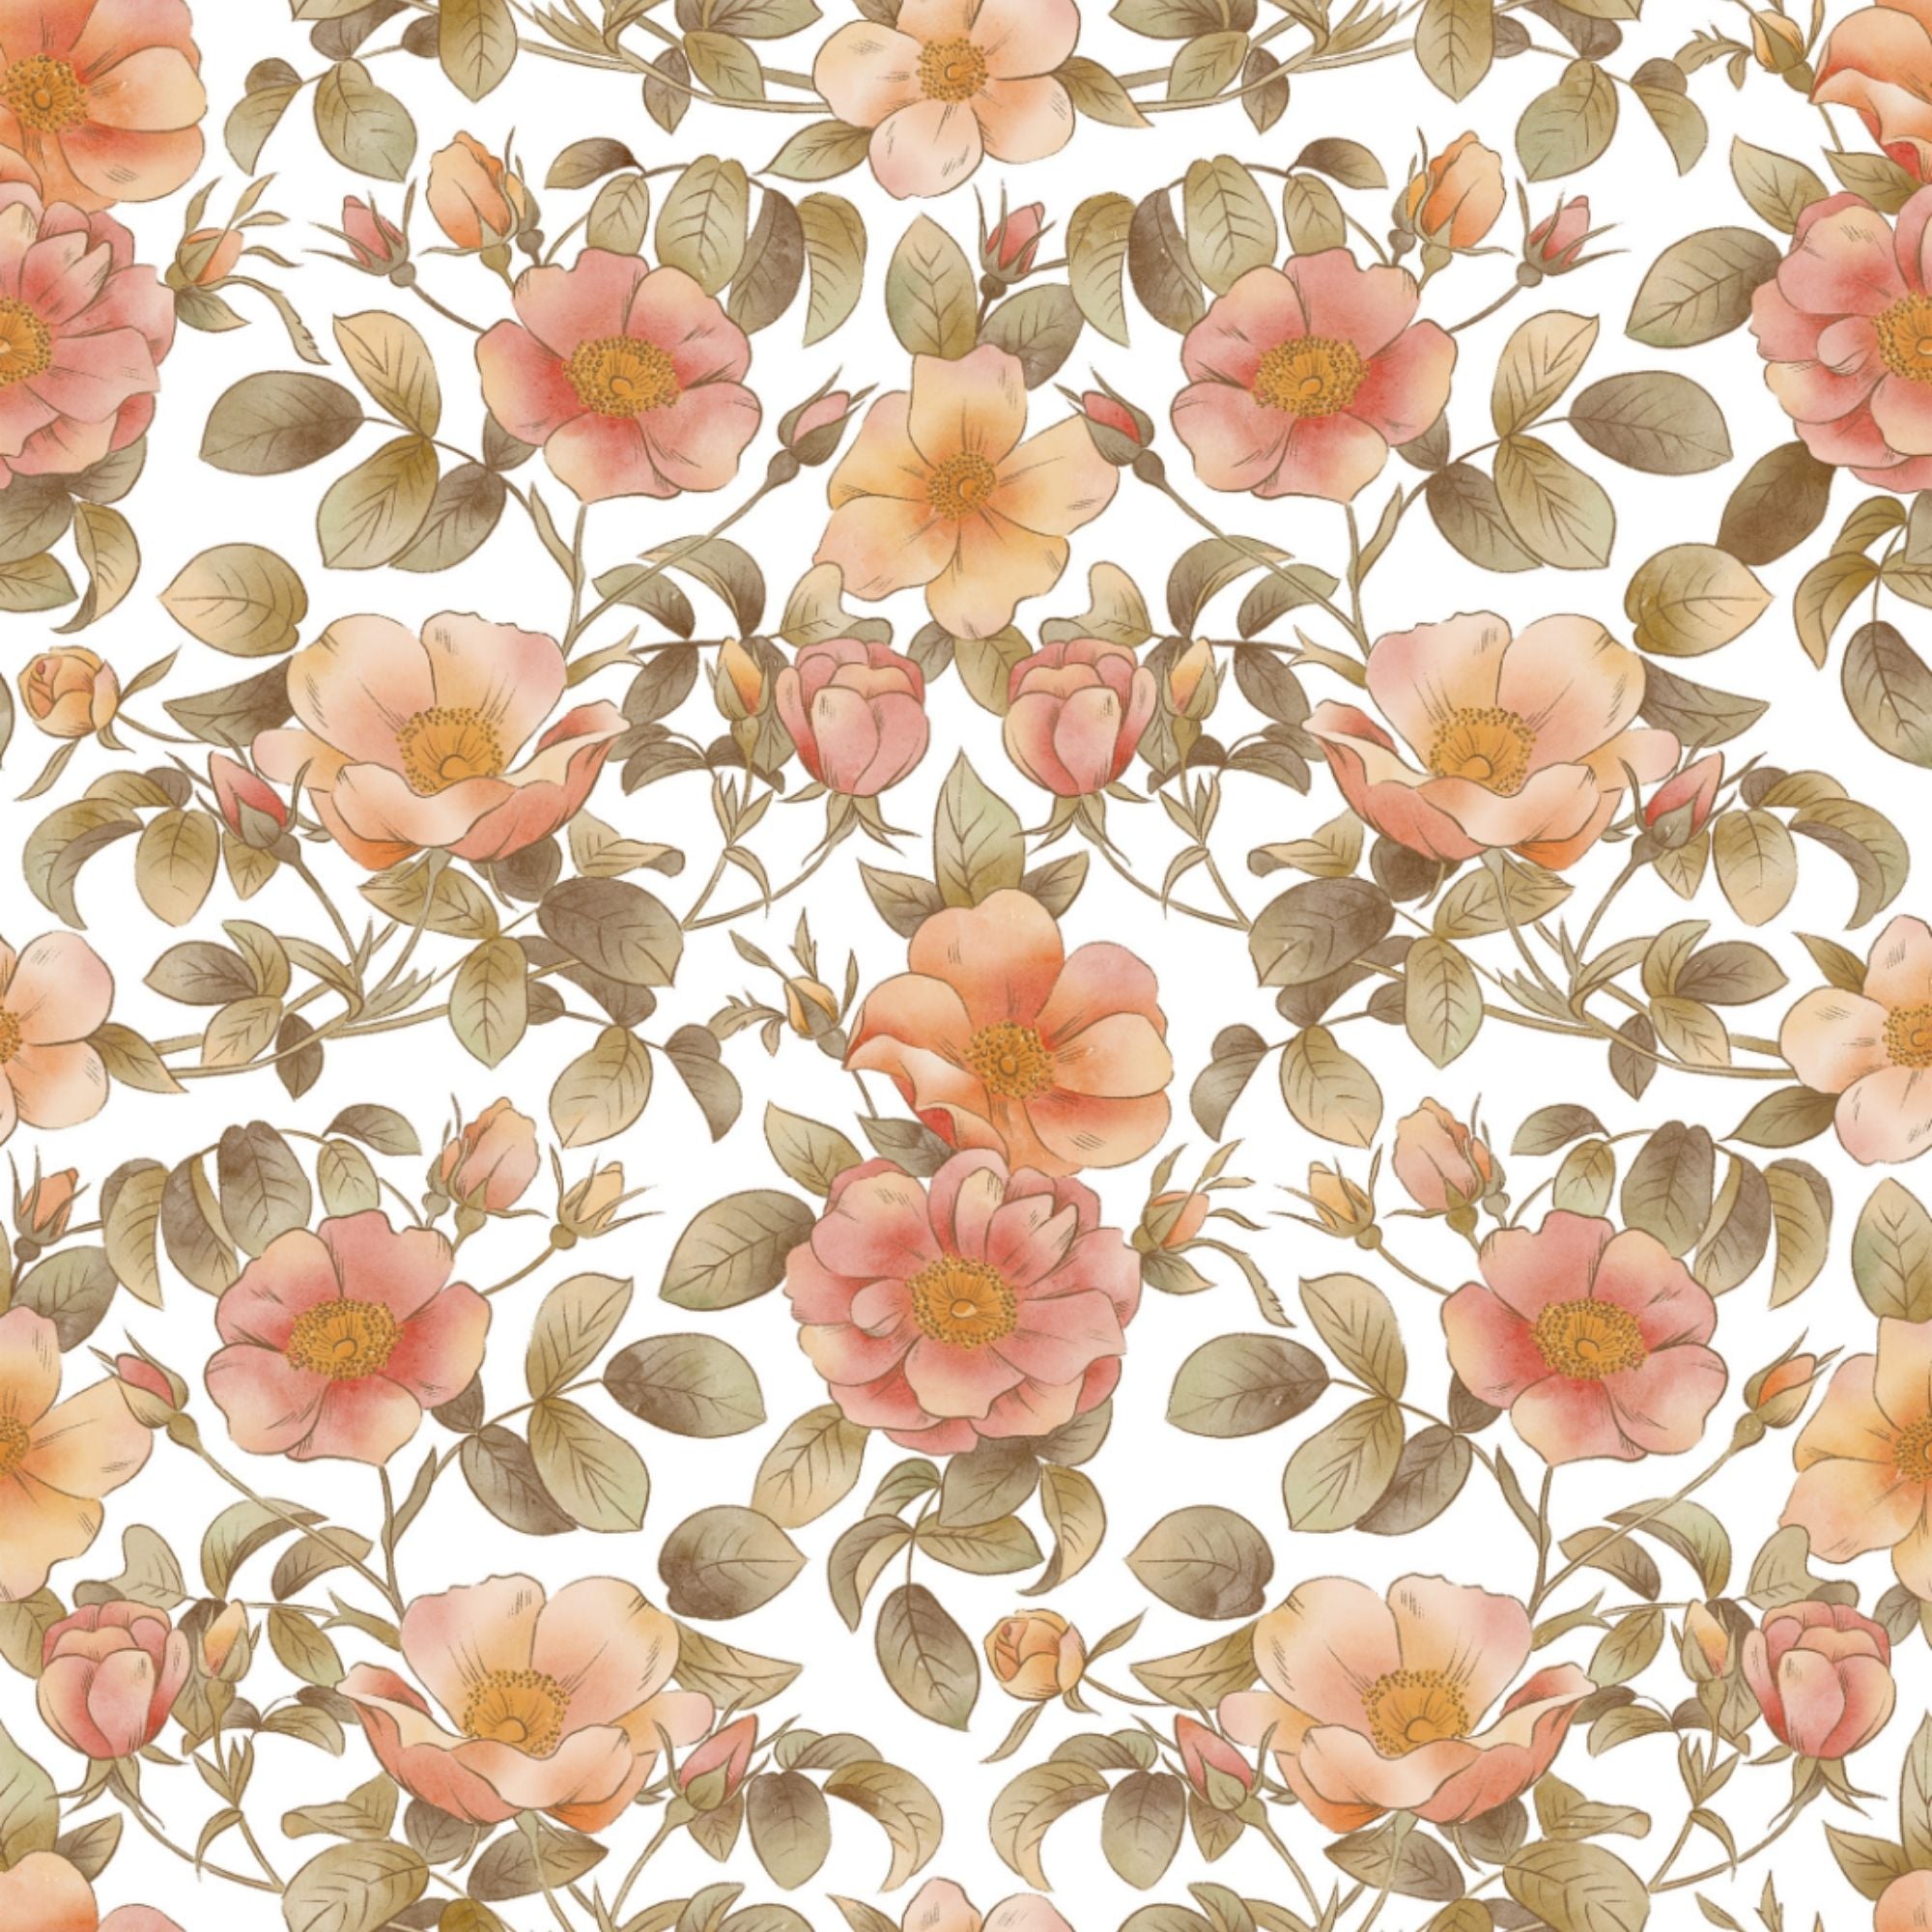 Close-up of Garden Prairie Watercolour Wallpaper roll showing detailed floral patterns in watercolor style.